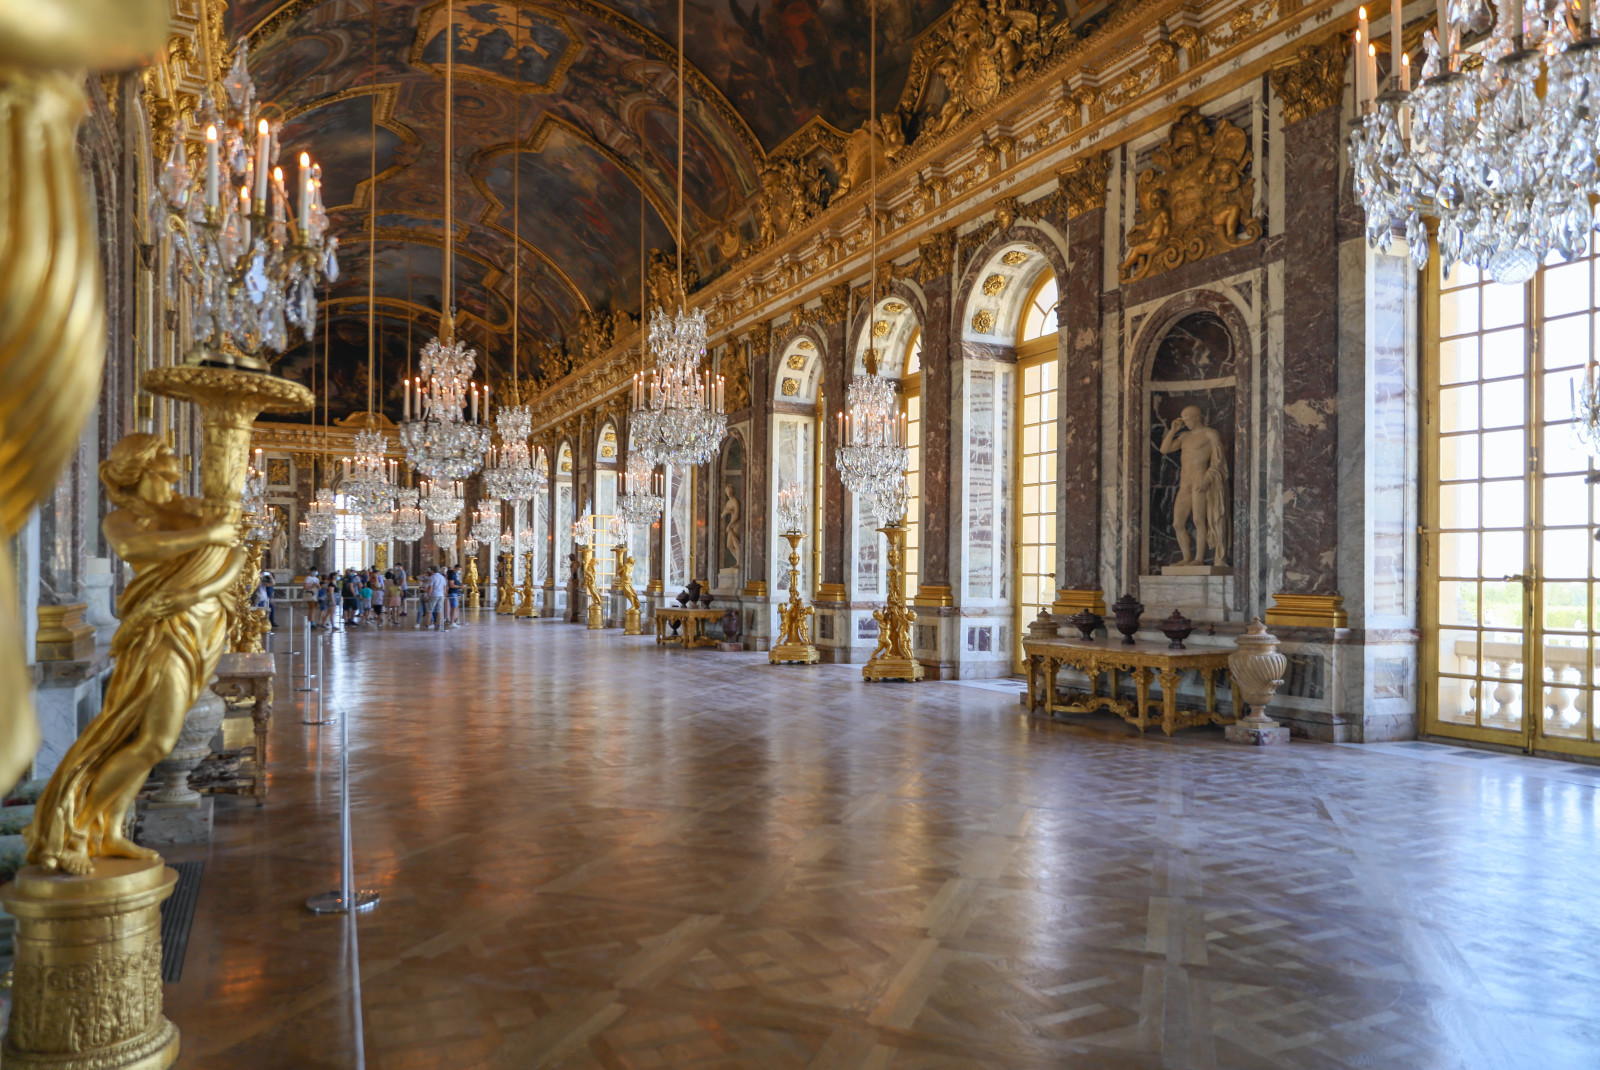 A large open hallway with hanging glass chandeliers and gold and white statues with paintings covering the ceiling